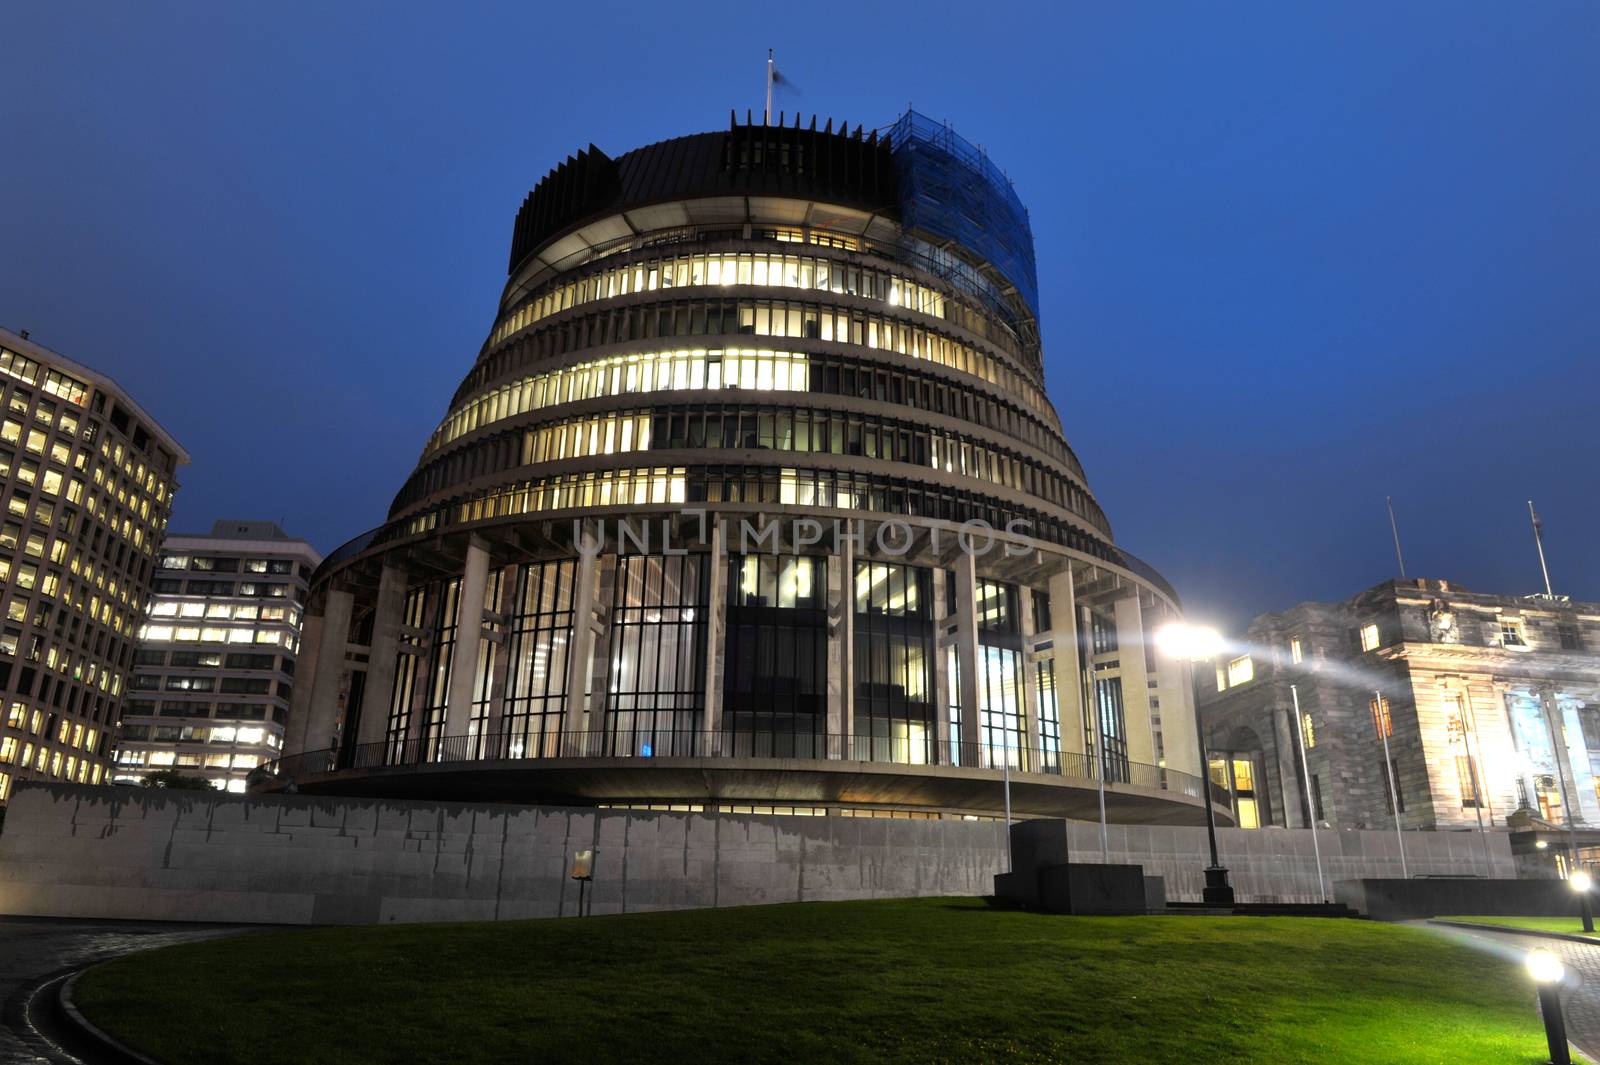 The Beehive building houses executive of New Zealand Parliament. It is located in Wellington